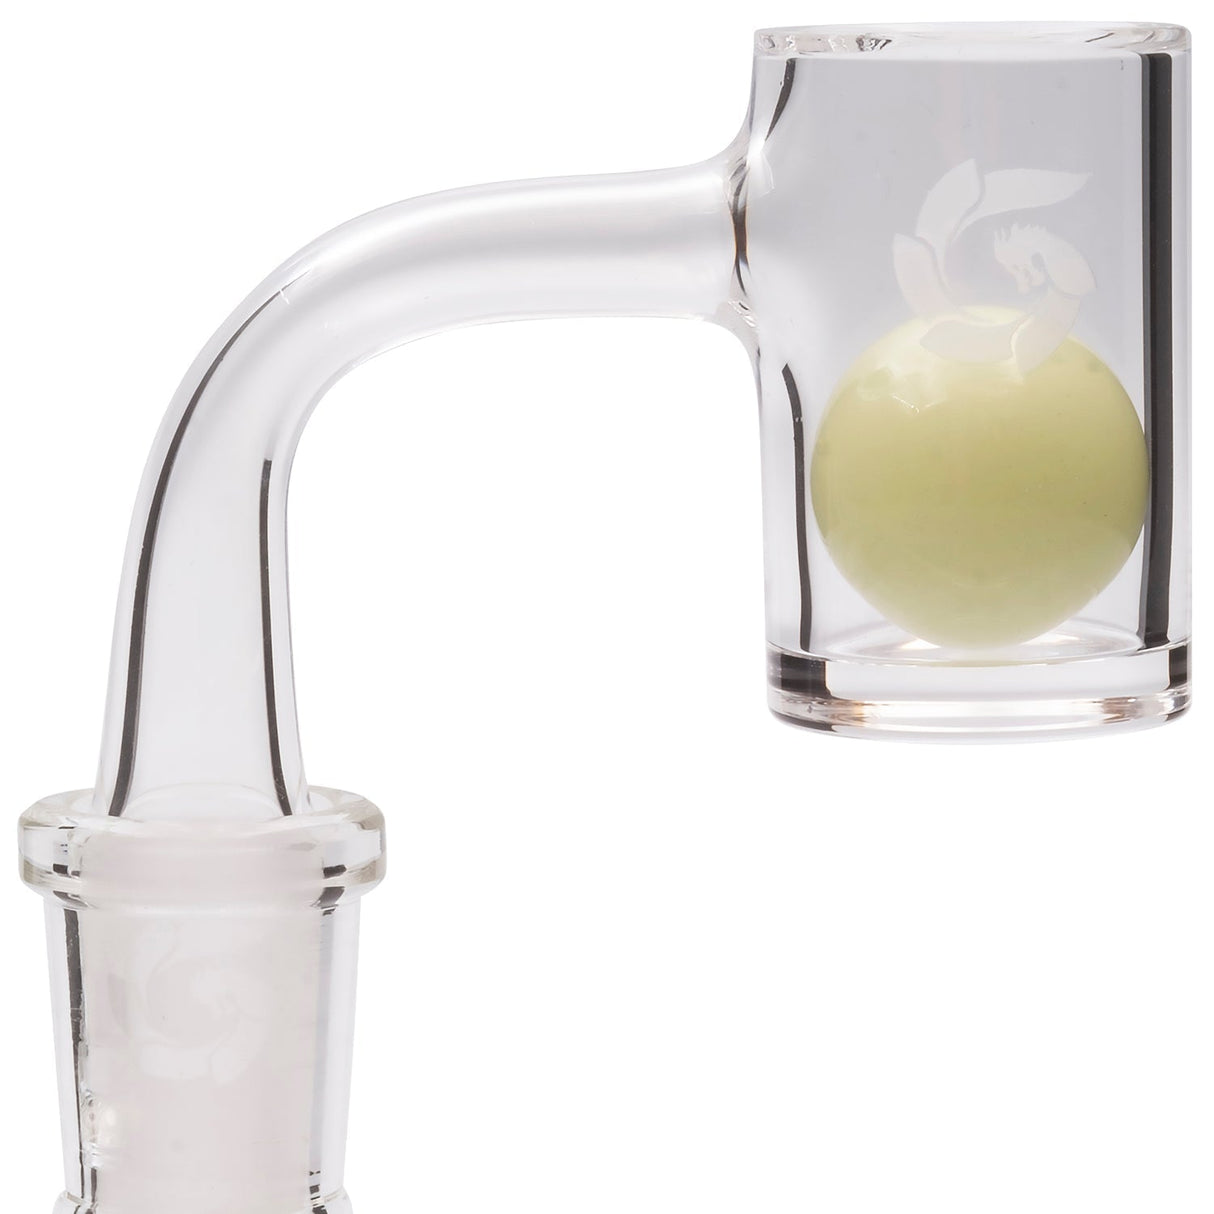 Glasshouse Classic Flat Top Quartz Banger, 90 Degree Male Joint, 25mm for Dab Rigs - Side View